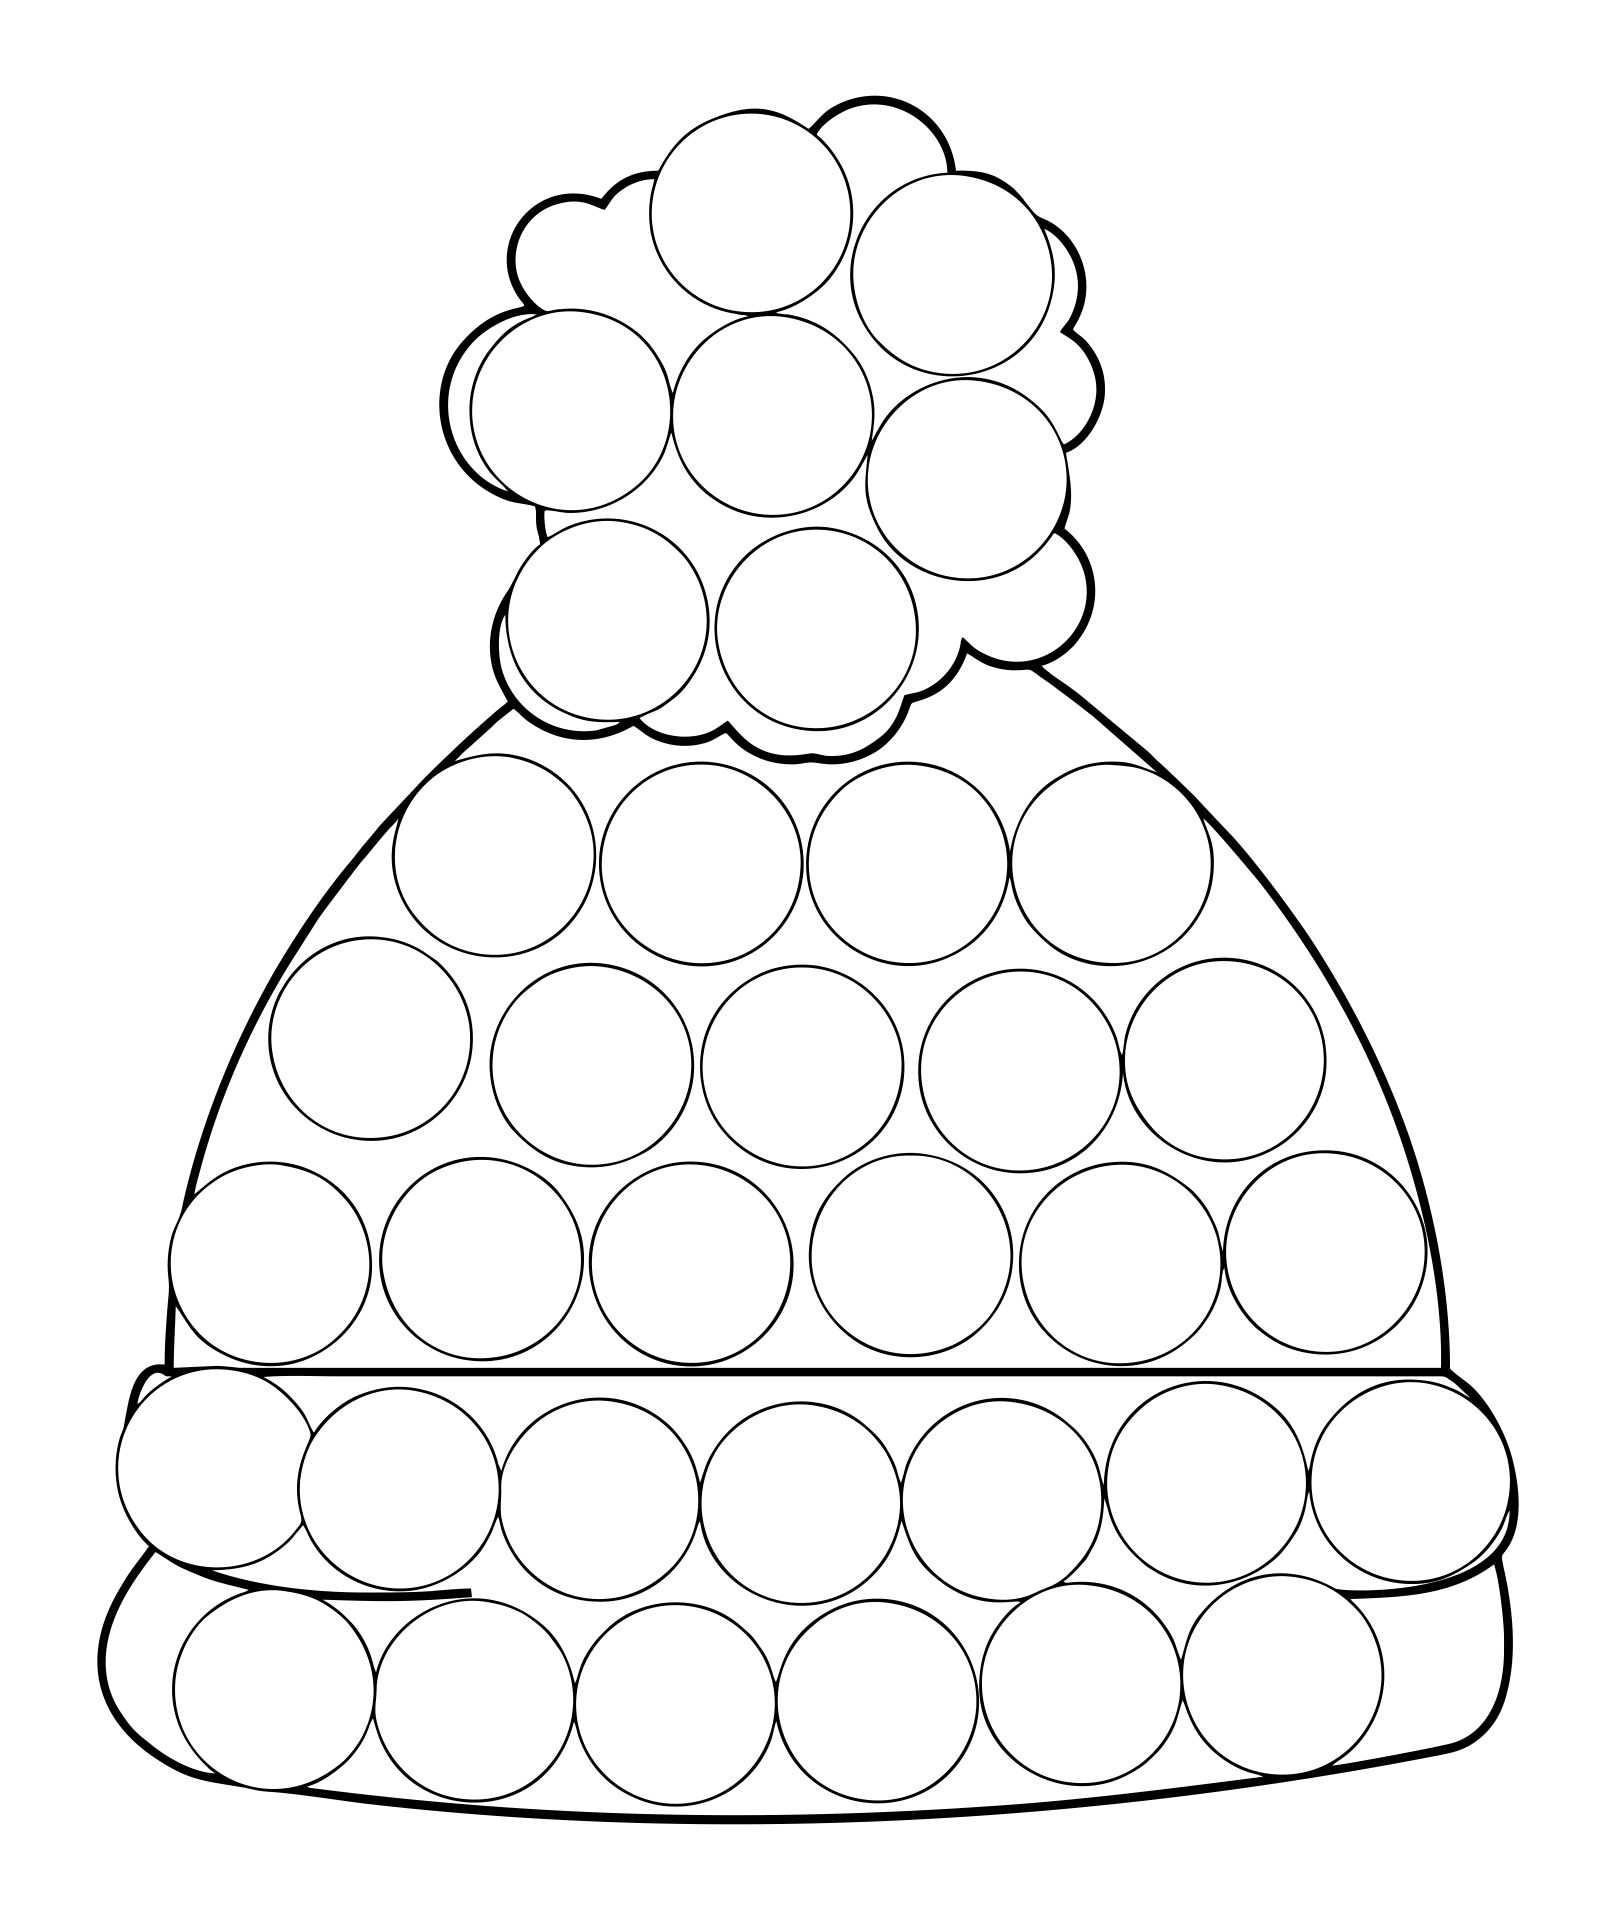 Free Printable Dot Marker Coloring Pages Free Dot Marker Activities